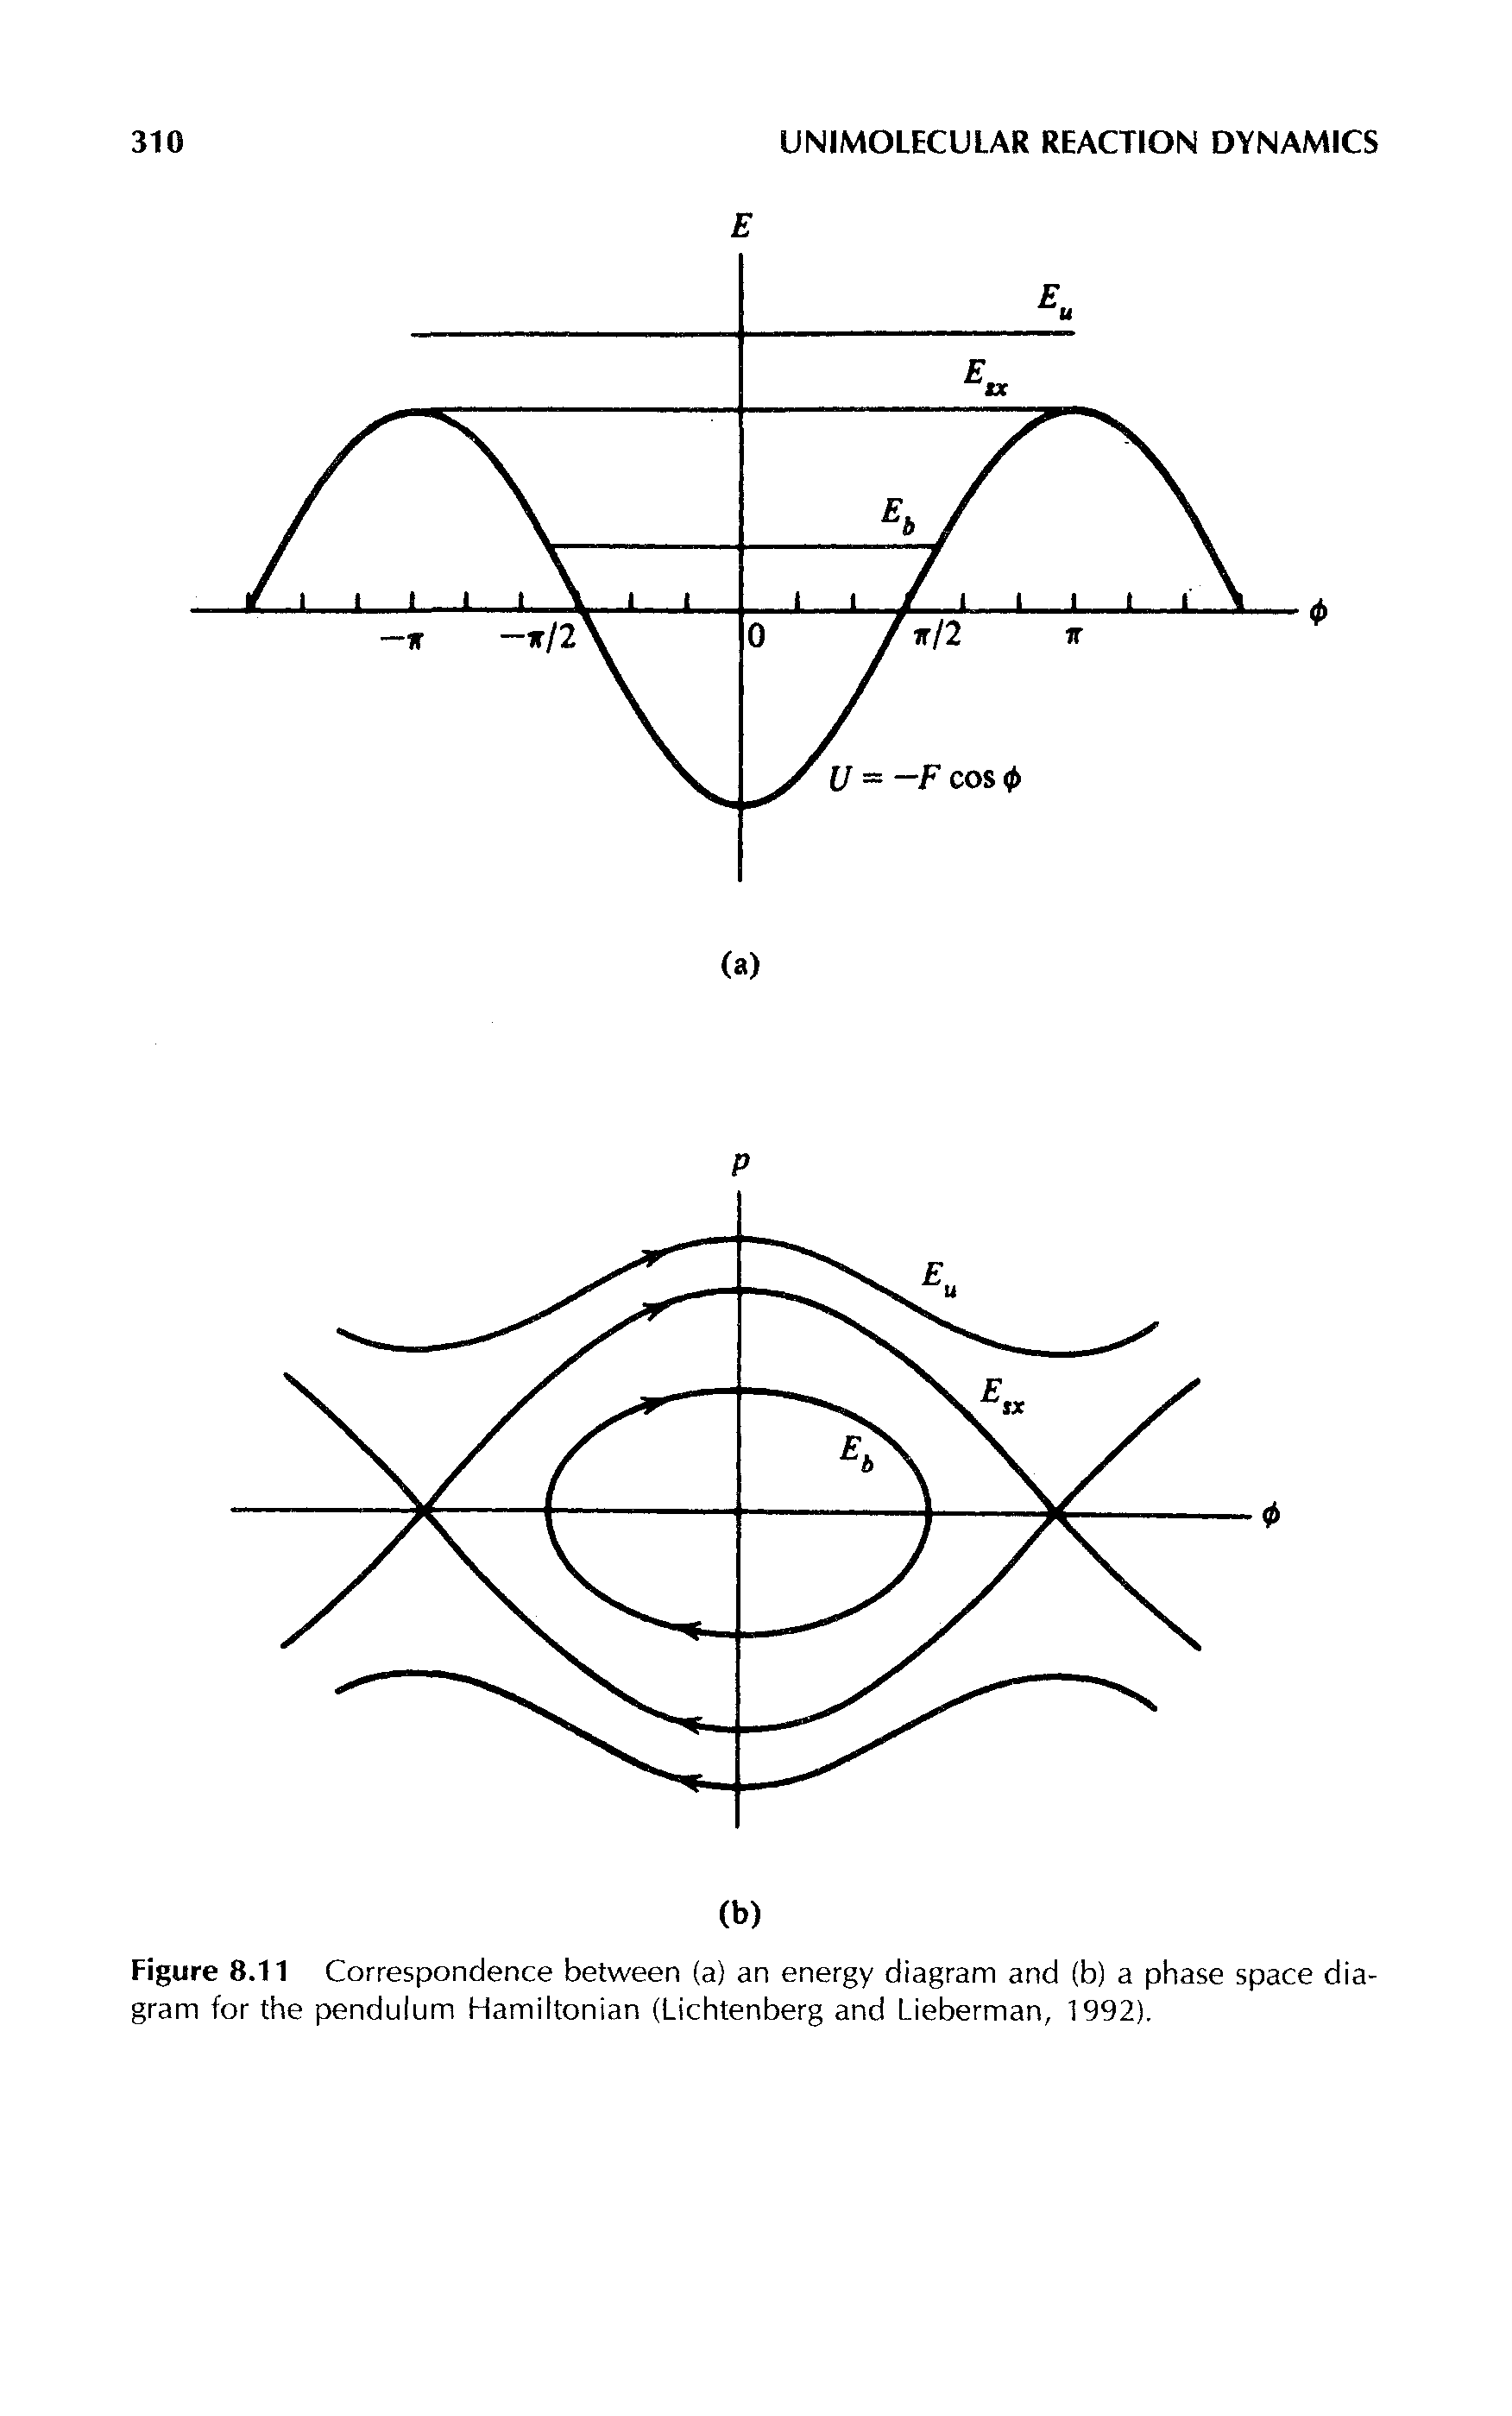 Figure 8.11 Correspondence between (a) an energy diagram and (b) a phase space diagram for the pendulum Hamiltonian (Lichtenberg and Lieberman, 1992).